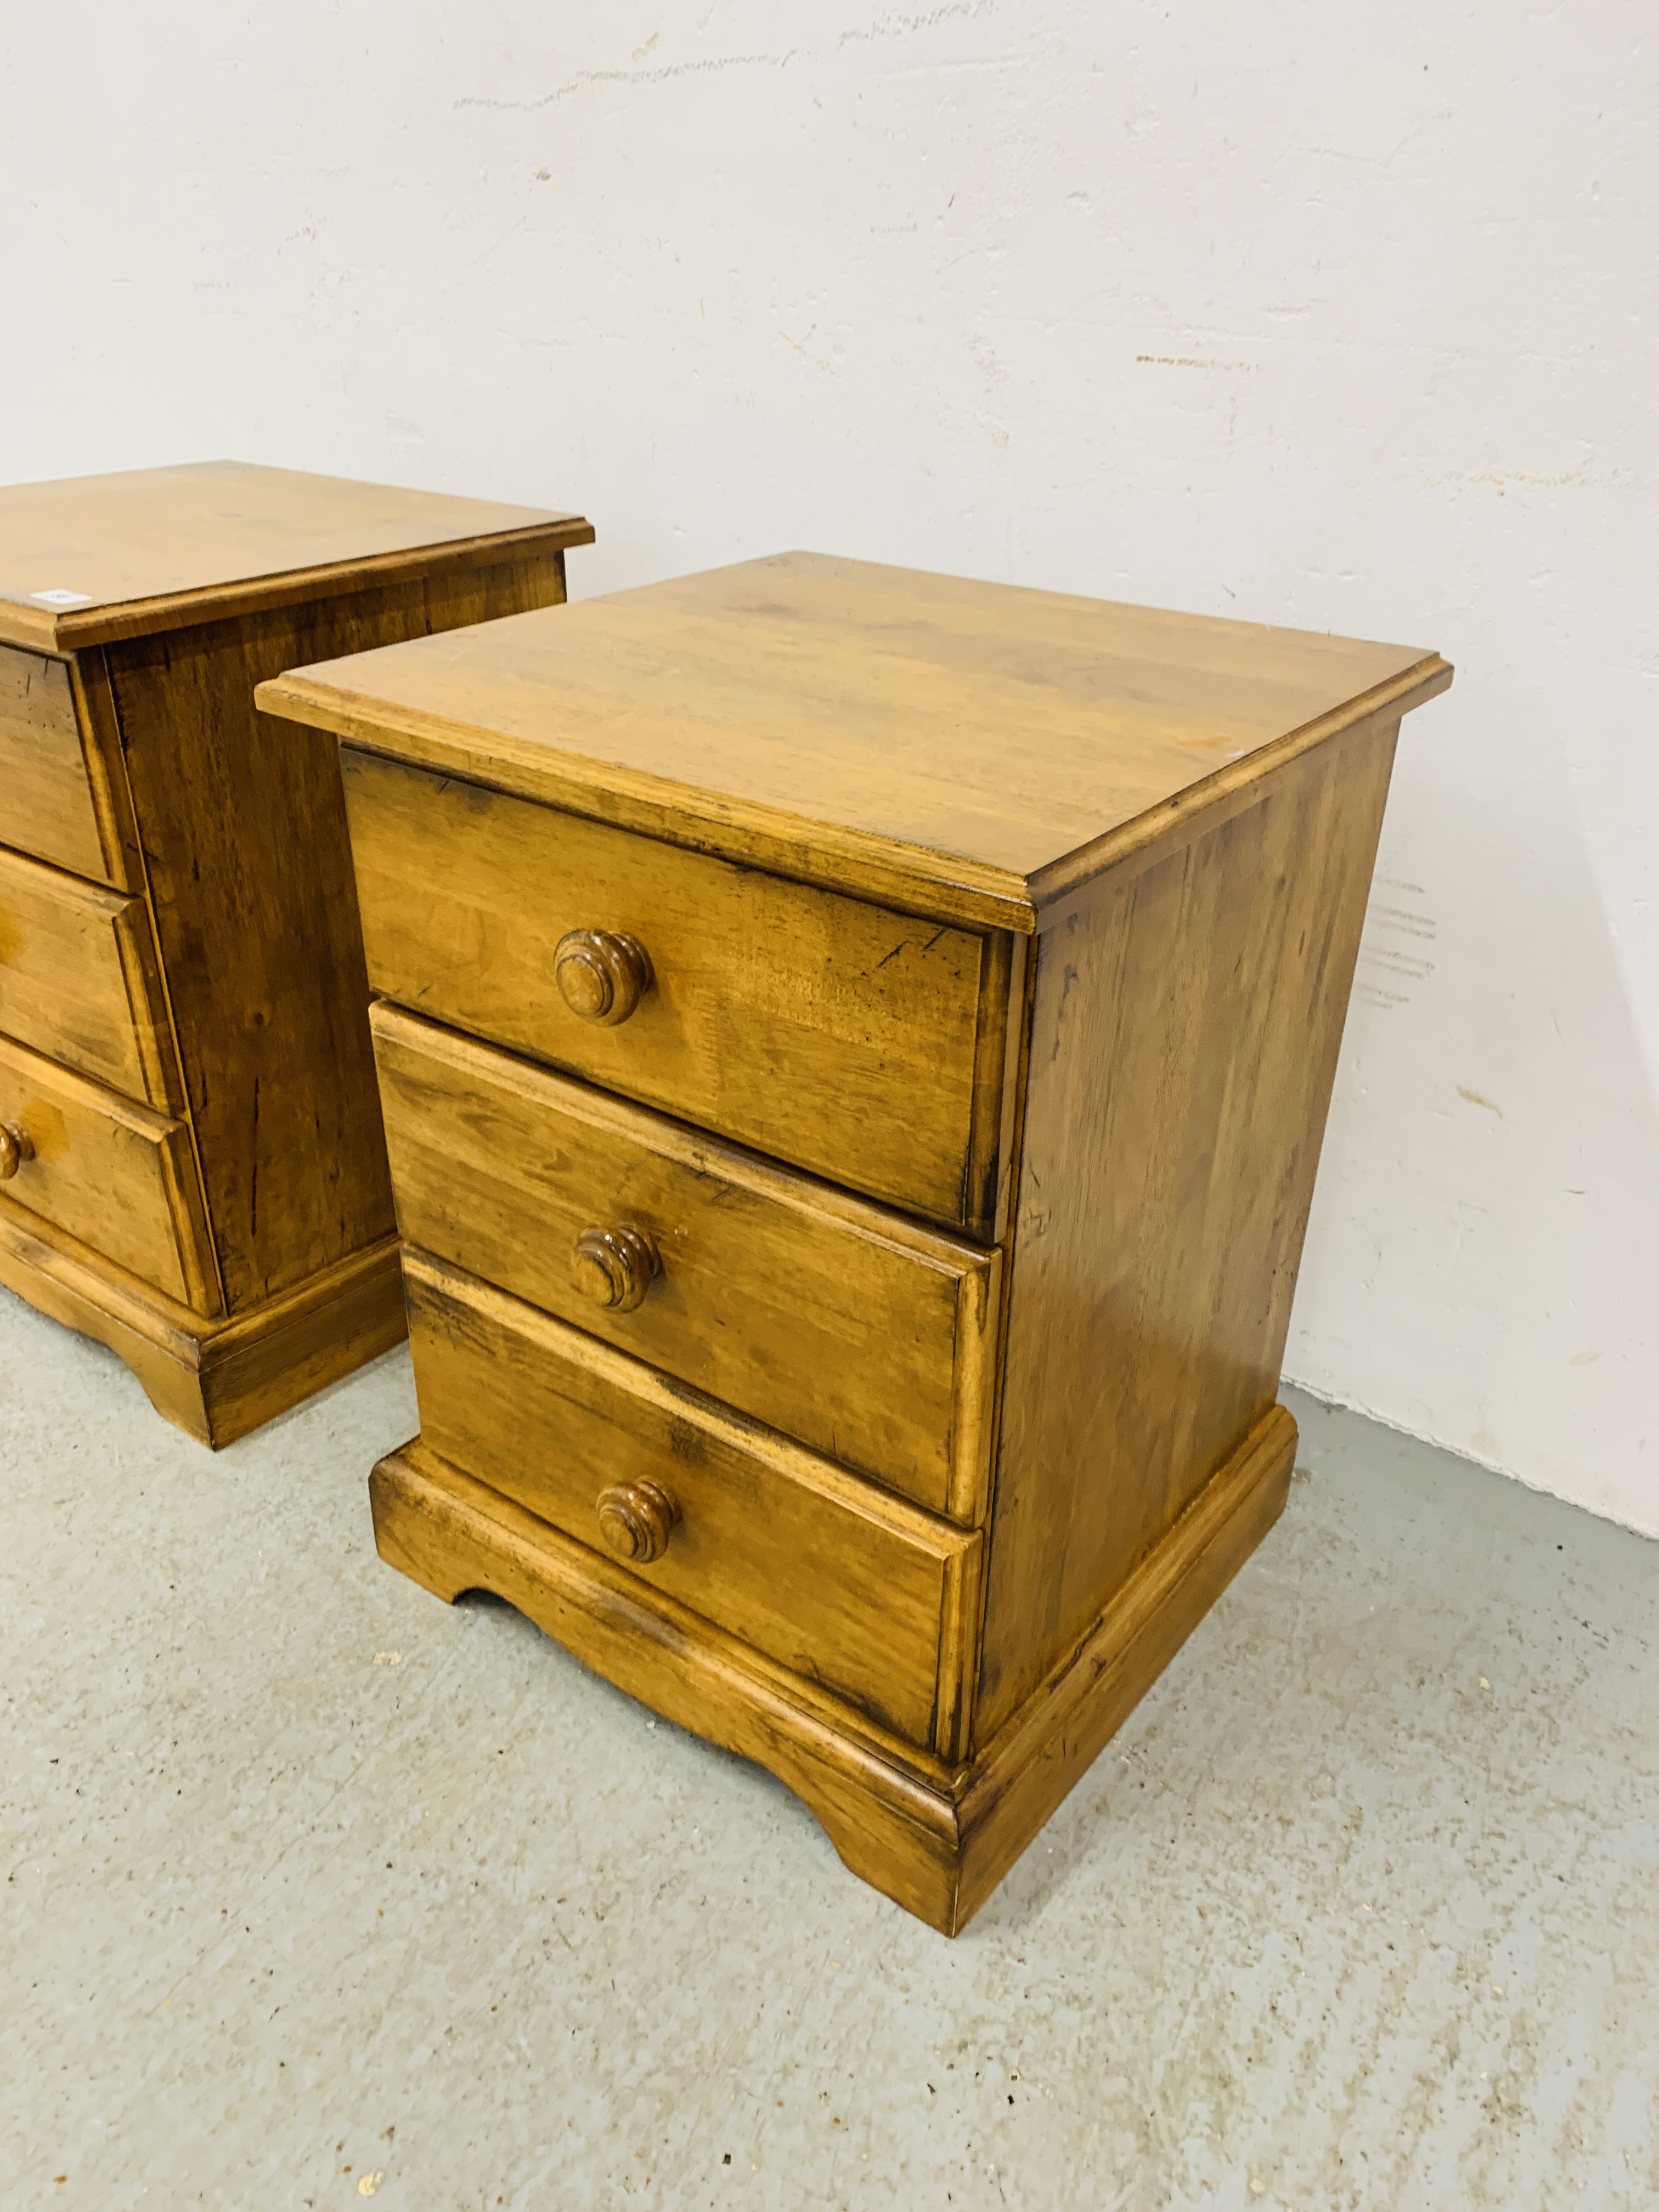 PAIR OF MODERN HARDWOOD 3 DRAWER BEDSIDE CHESTS, WITH TURNED HANDLES - W 49CM. D 46CM. H 63CM. - Image 2 of 6